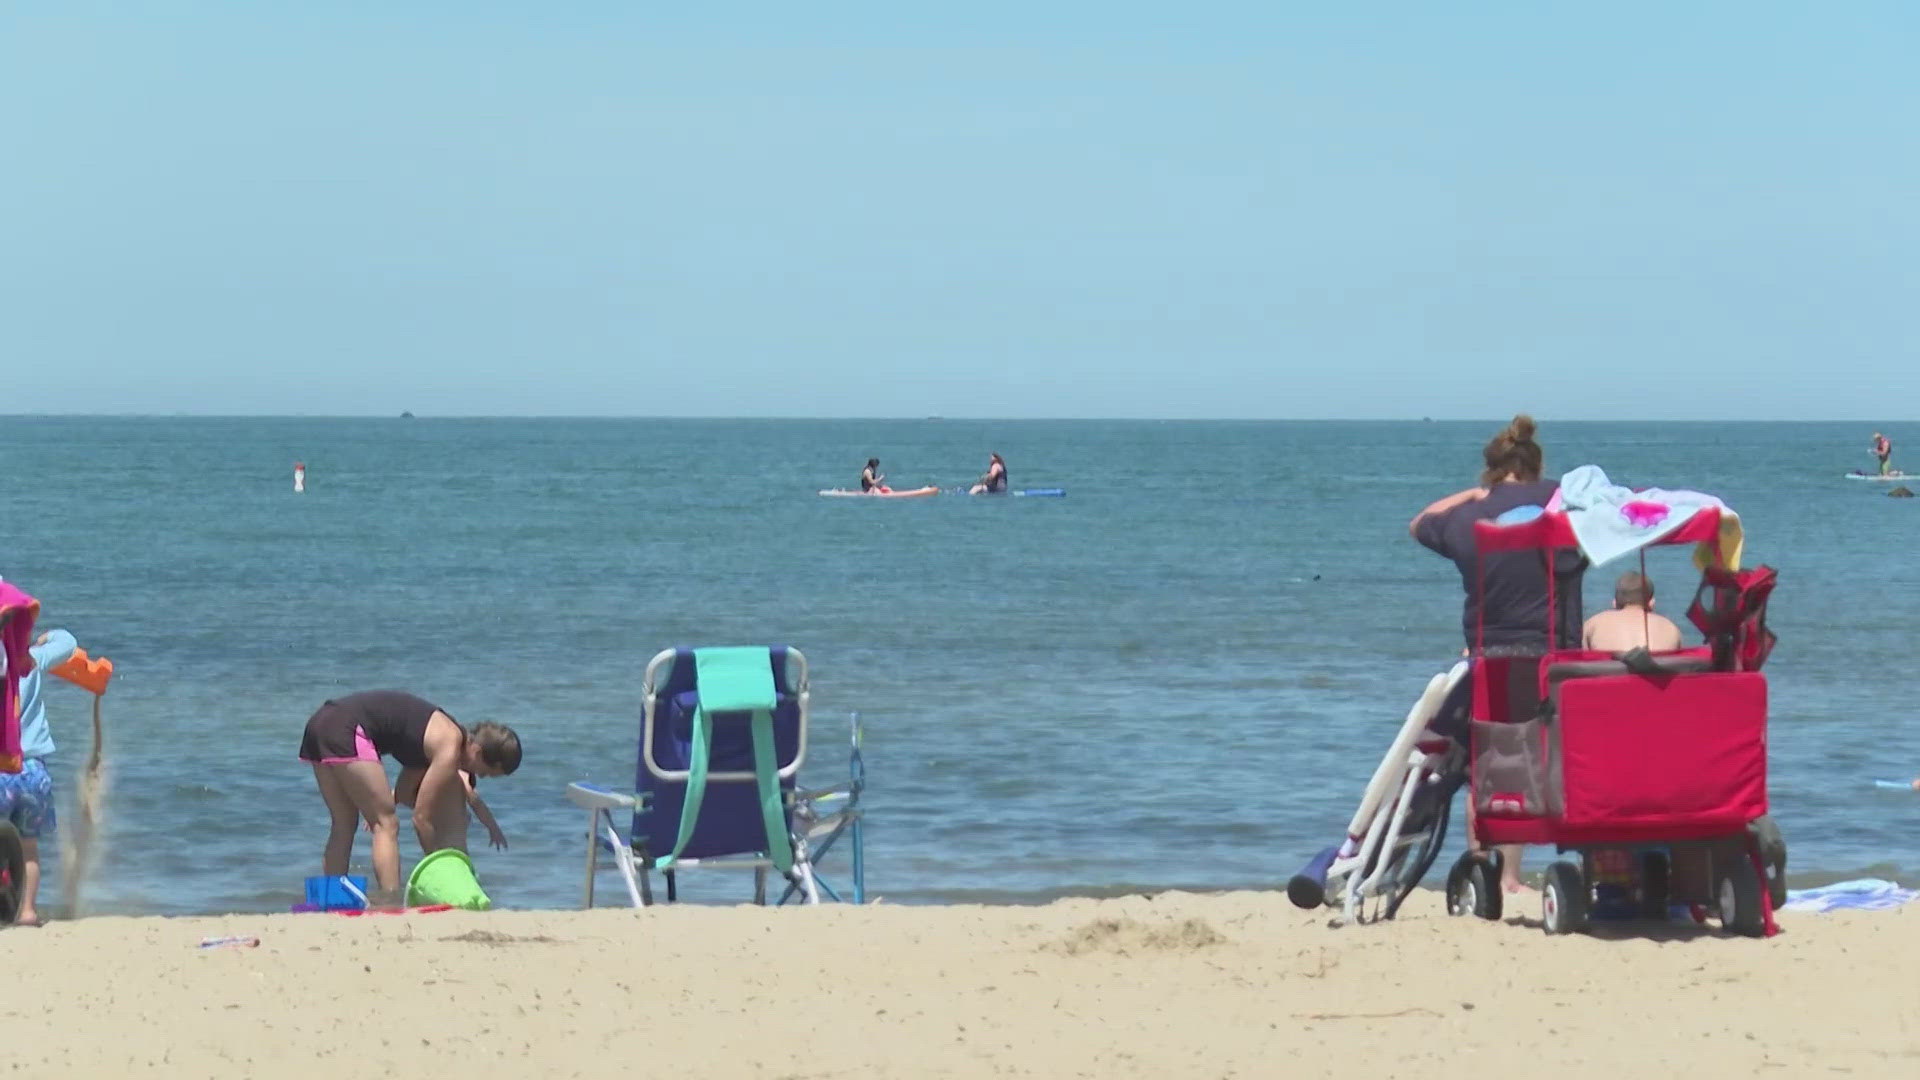 The U.S. Coast Guard says this weekend is really the start of recreational water activities and, they're reminding everyone to come prepared.